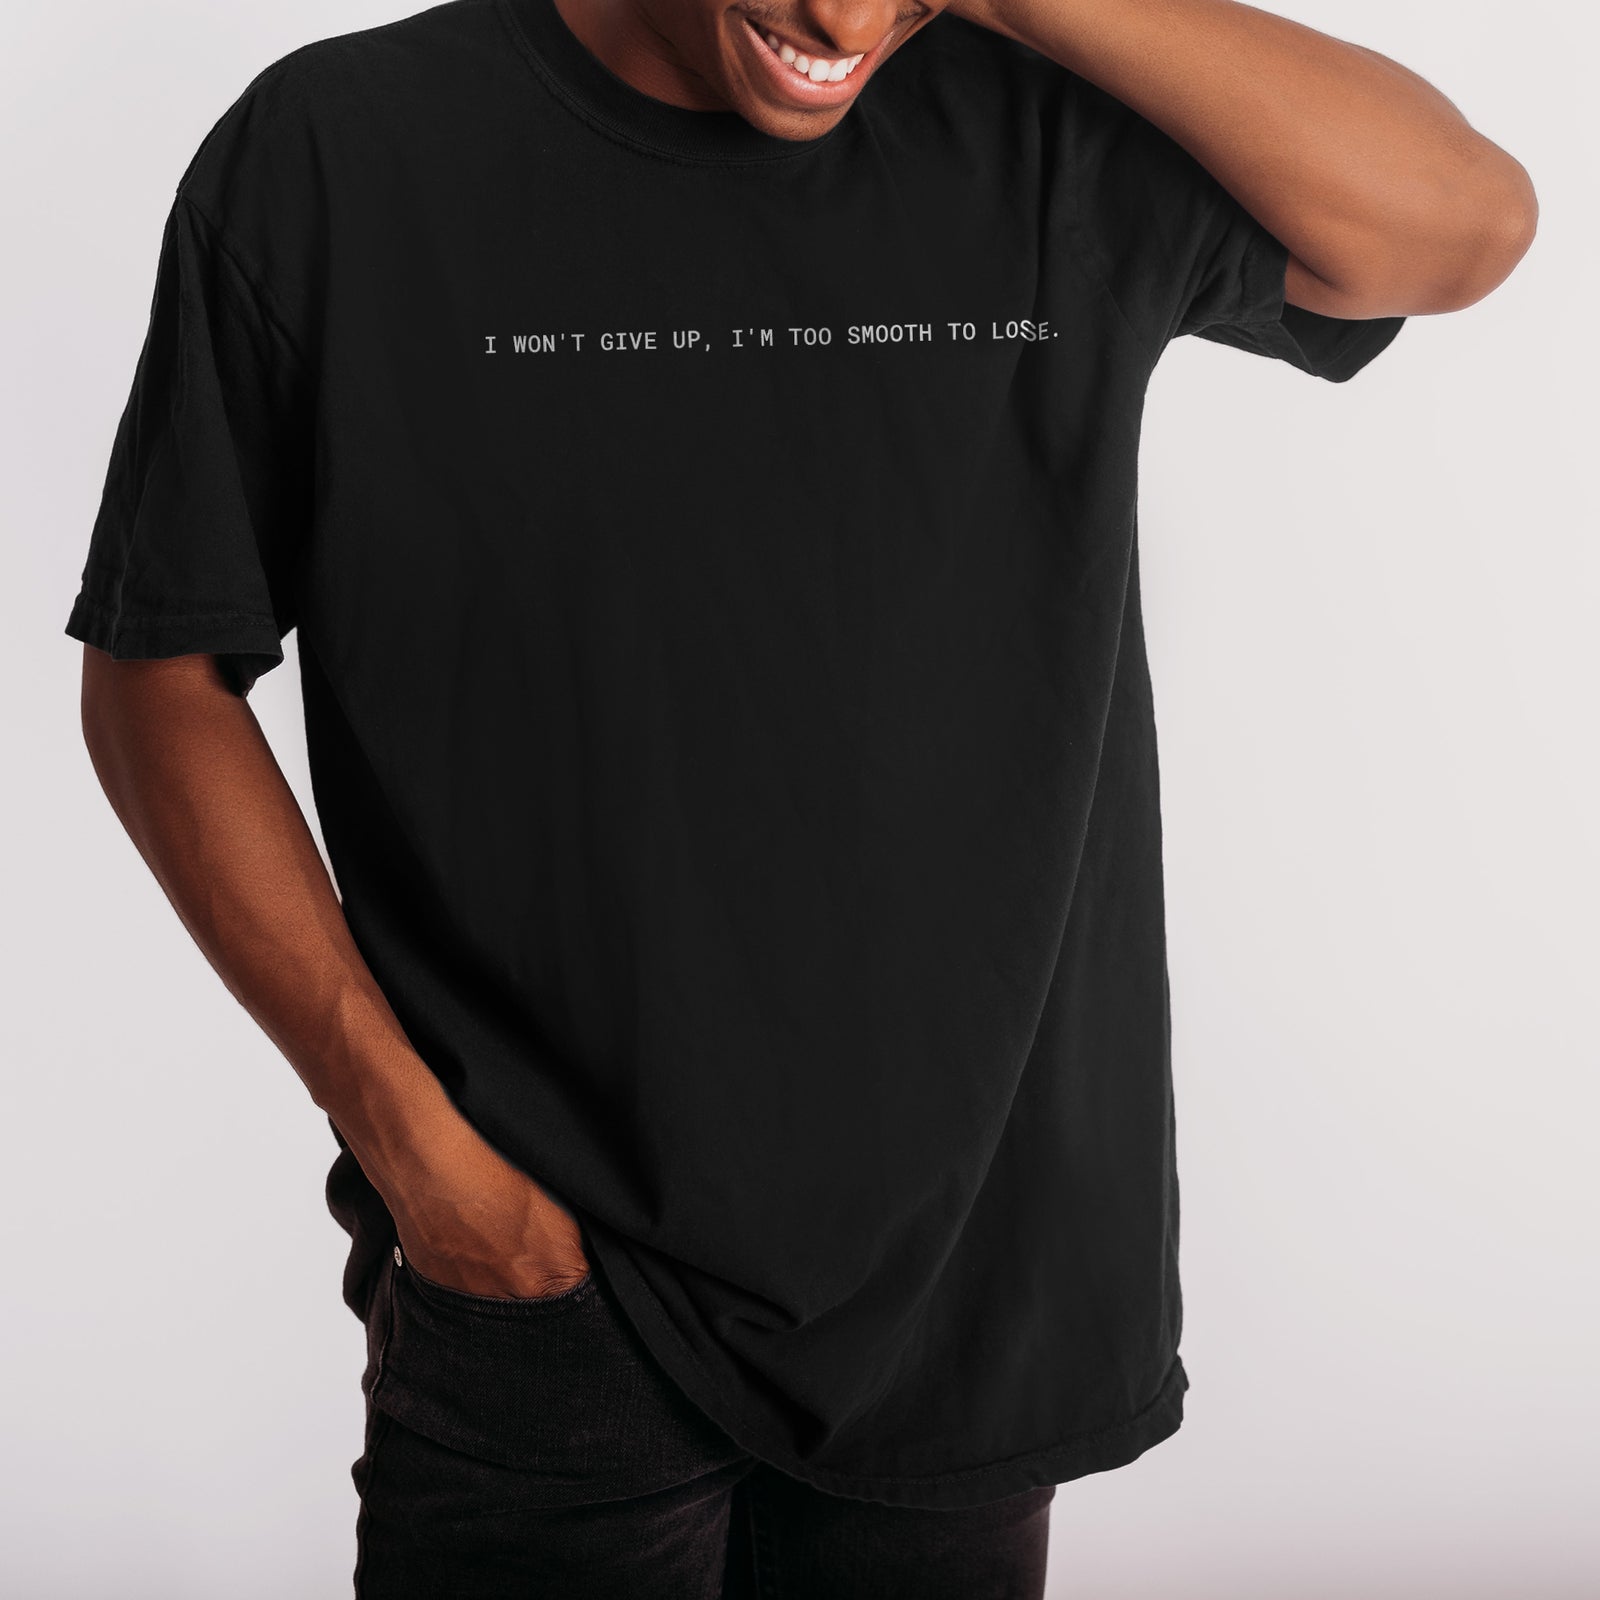 I Won't Give Up, I'm Too Smooth to Lose Boyfriend Crew Tee Solid Black Closeup Artwork and Texture